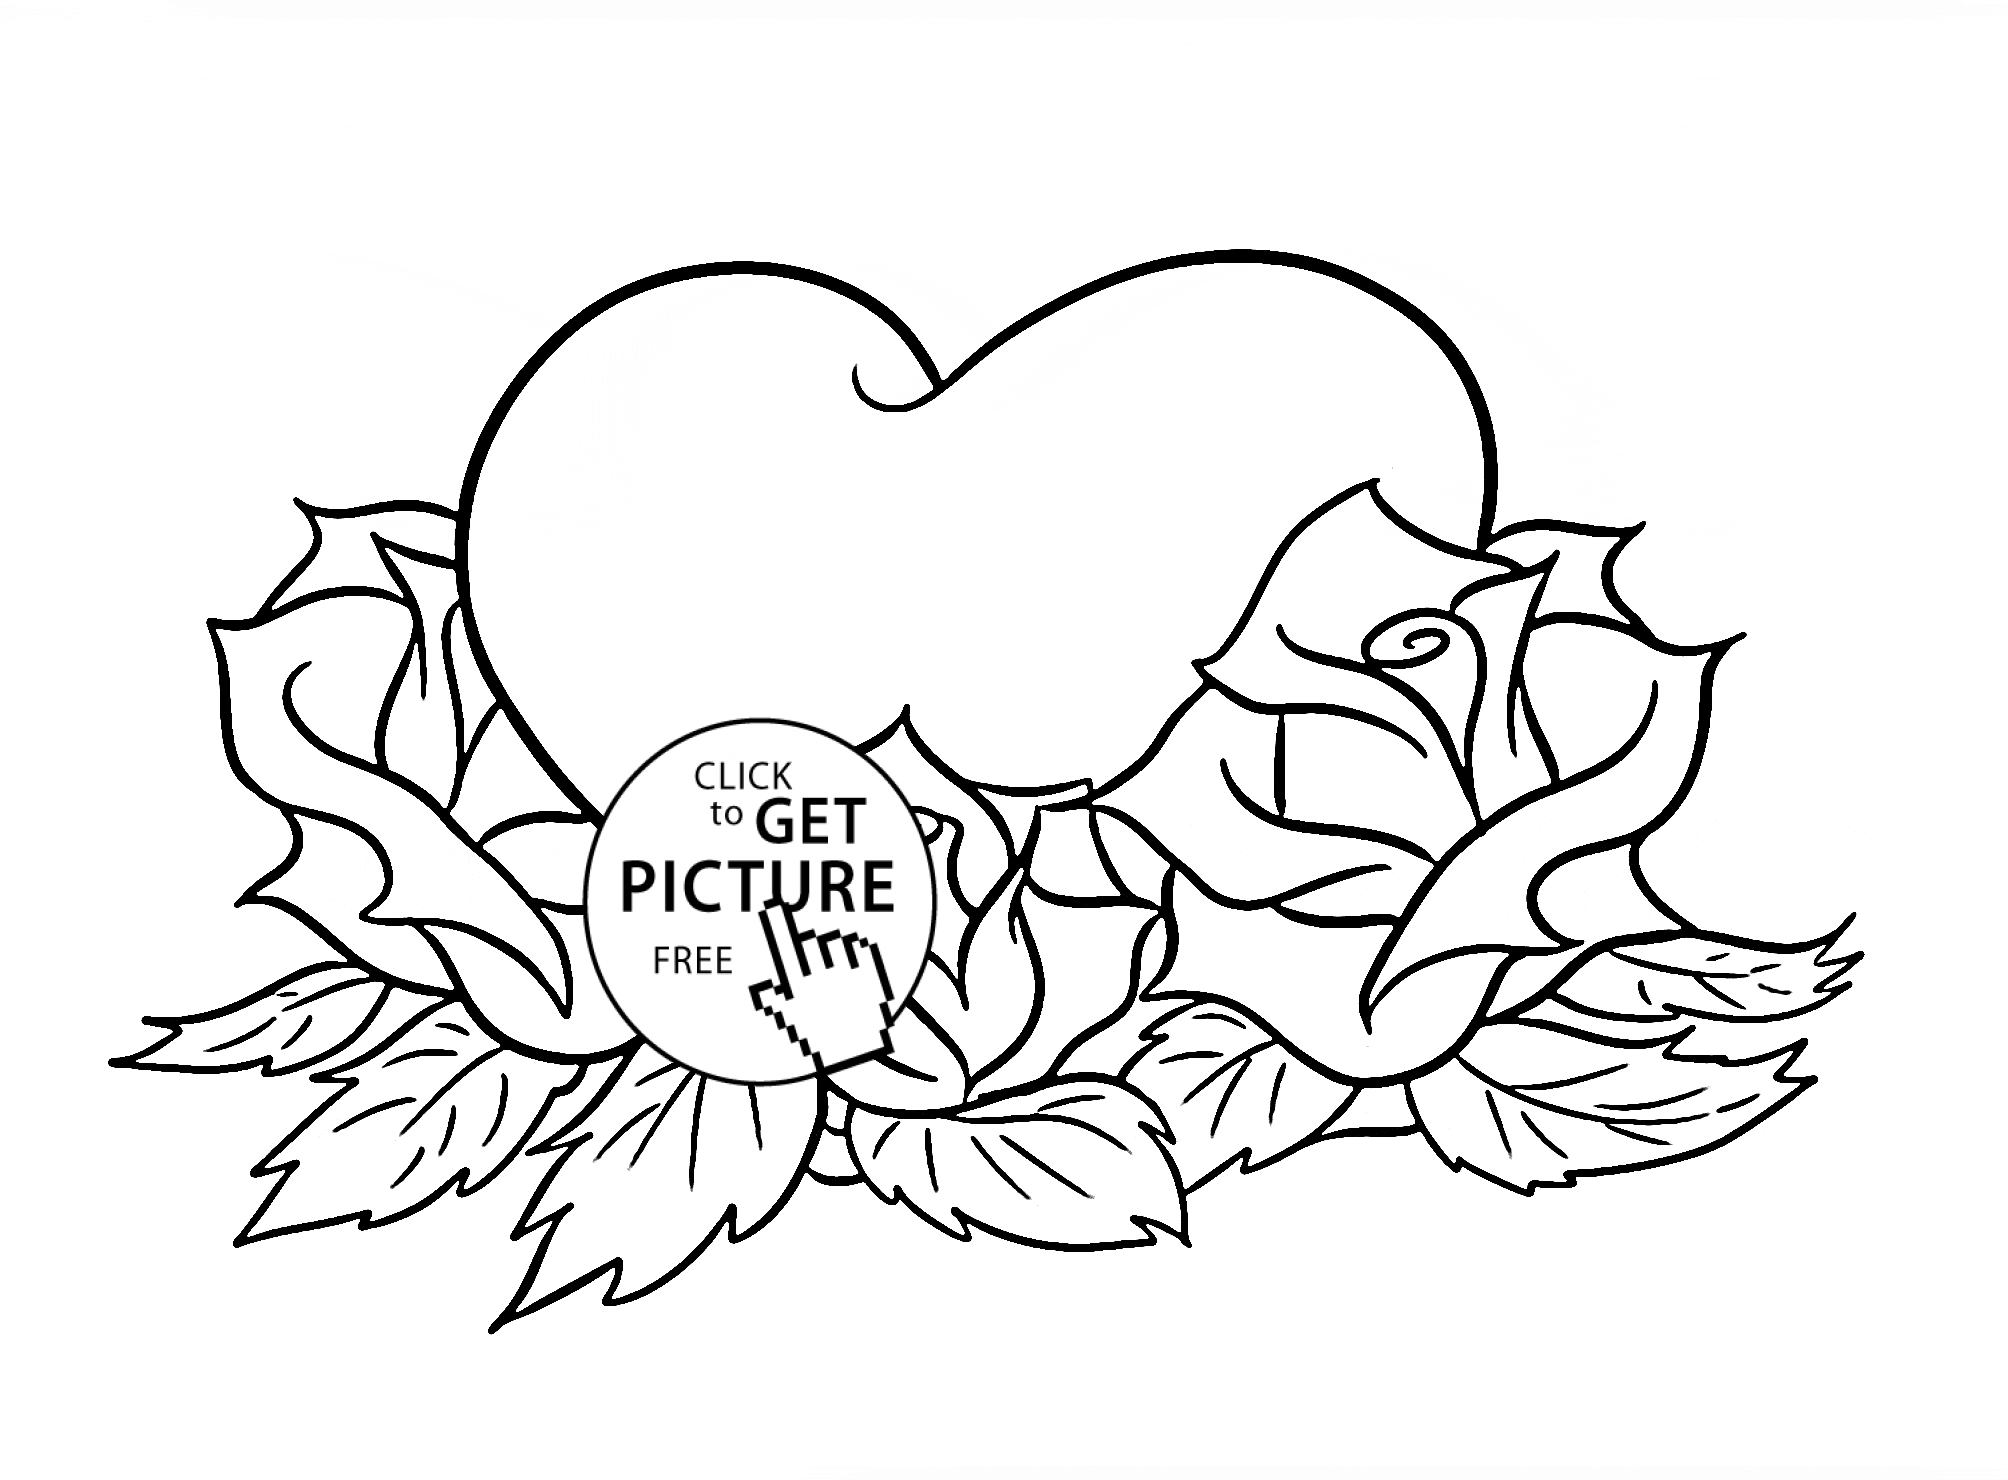 Roses And Hearts Coloring Pages 21 Coloring Pages Of Hearts And Flowers Printable Free Coloring